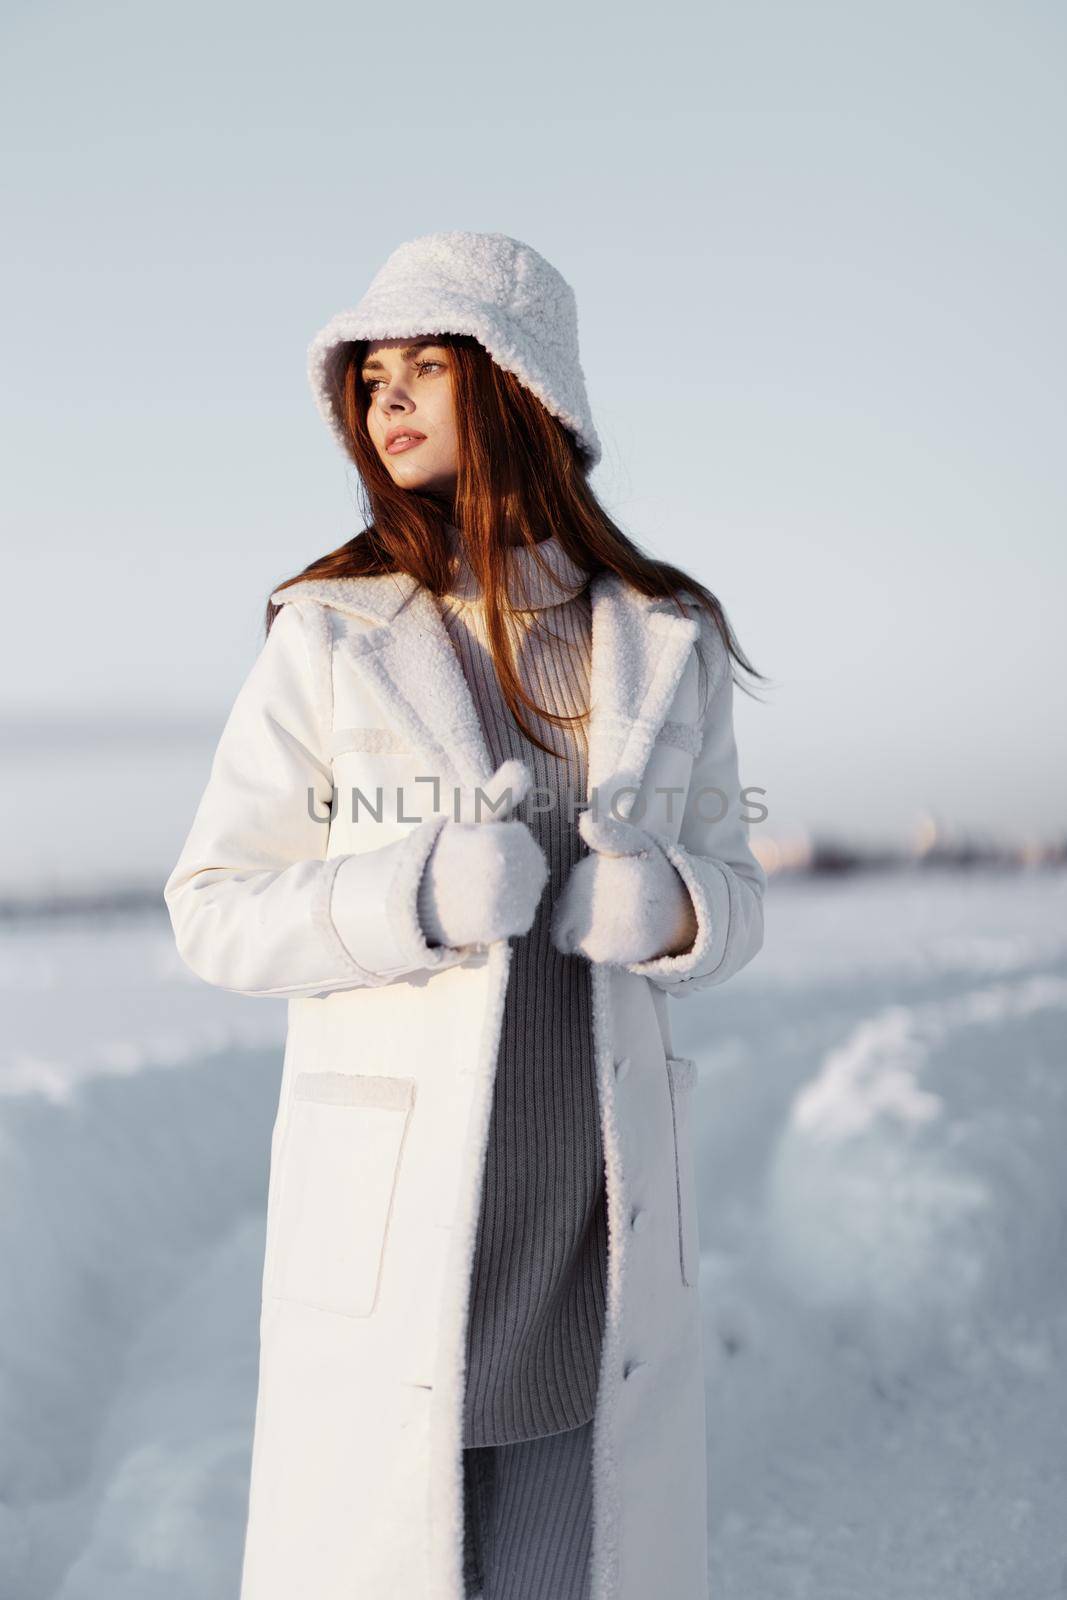 young woman in a white coat in a hat winter landscape walk Fresh air. High quality photo